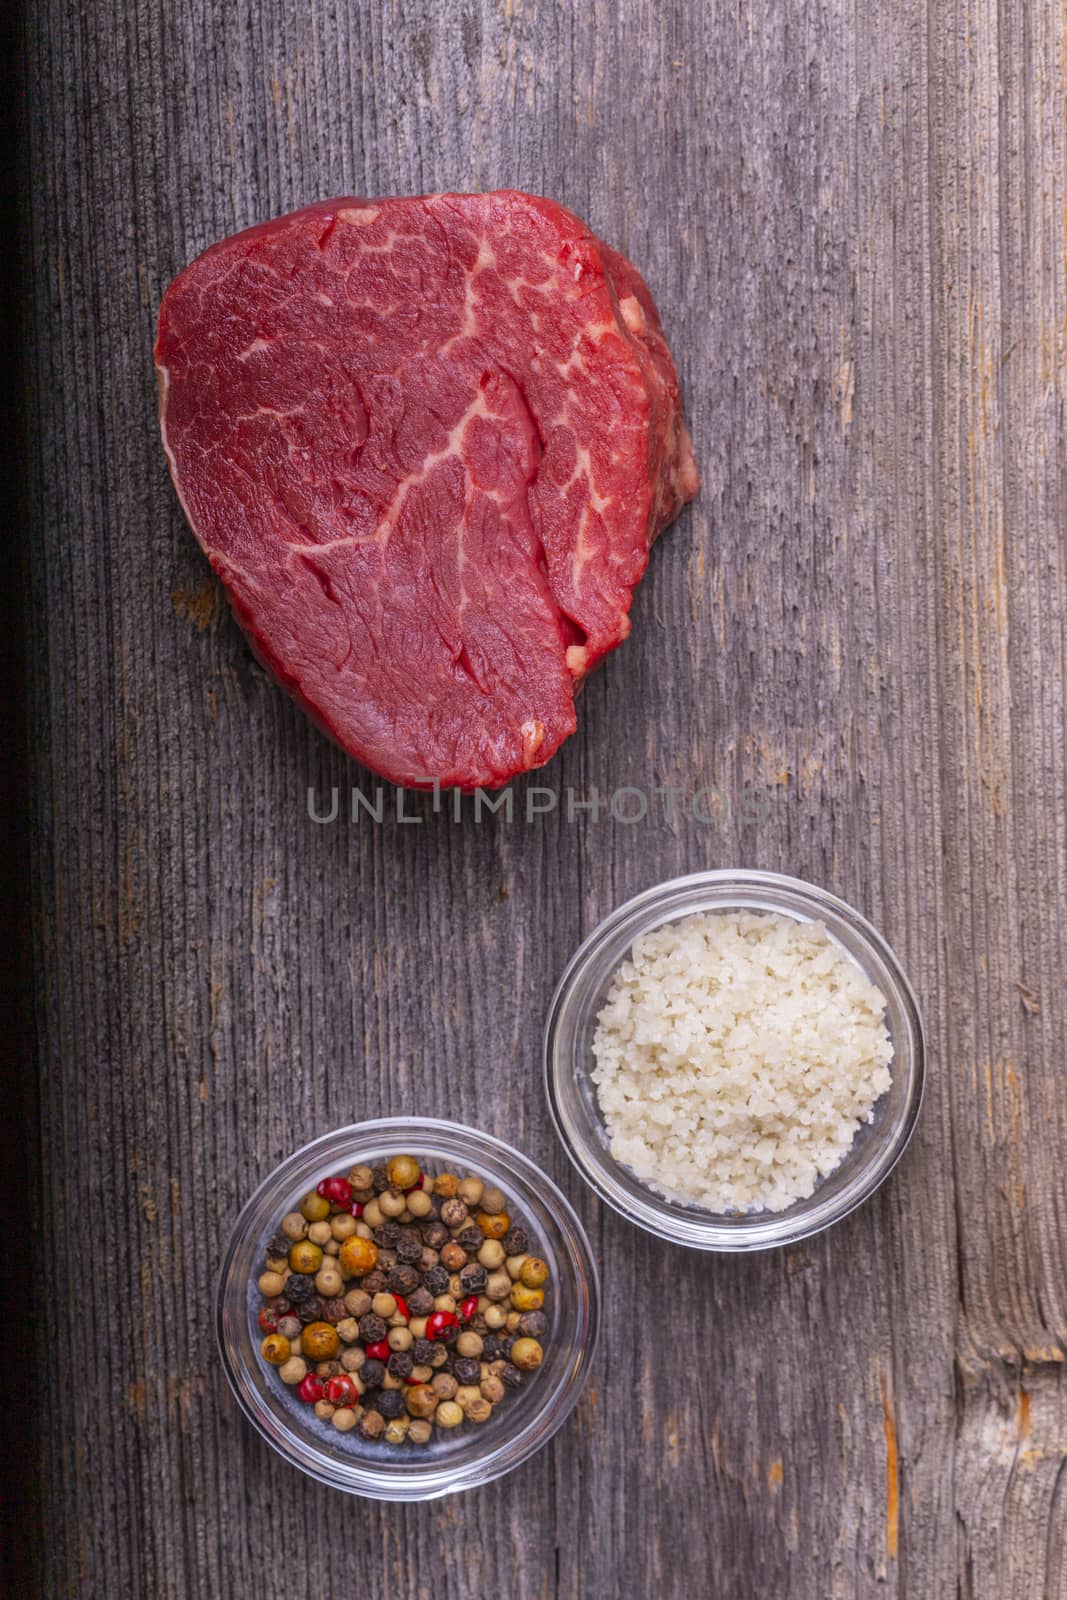 overview of a raw steak on wood